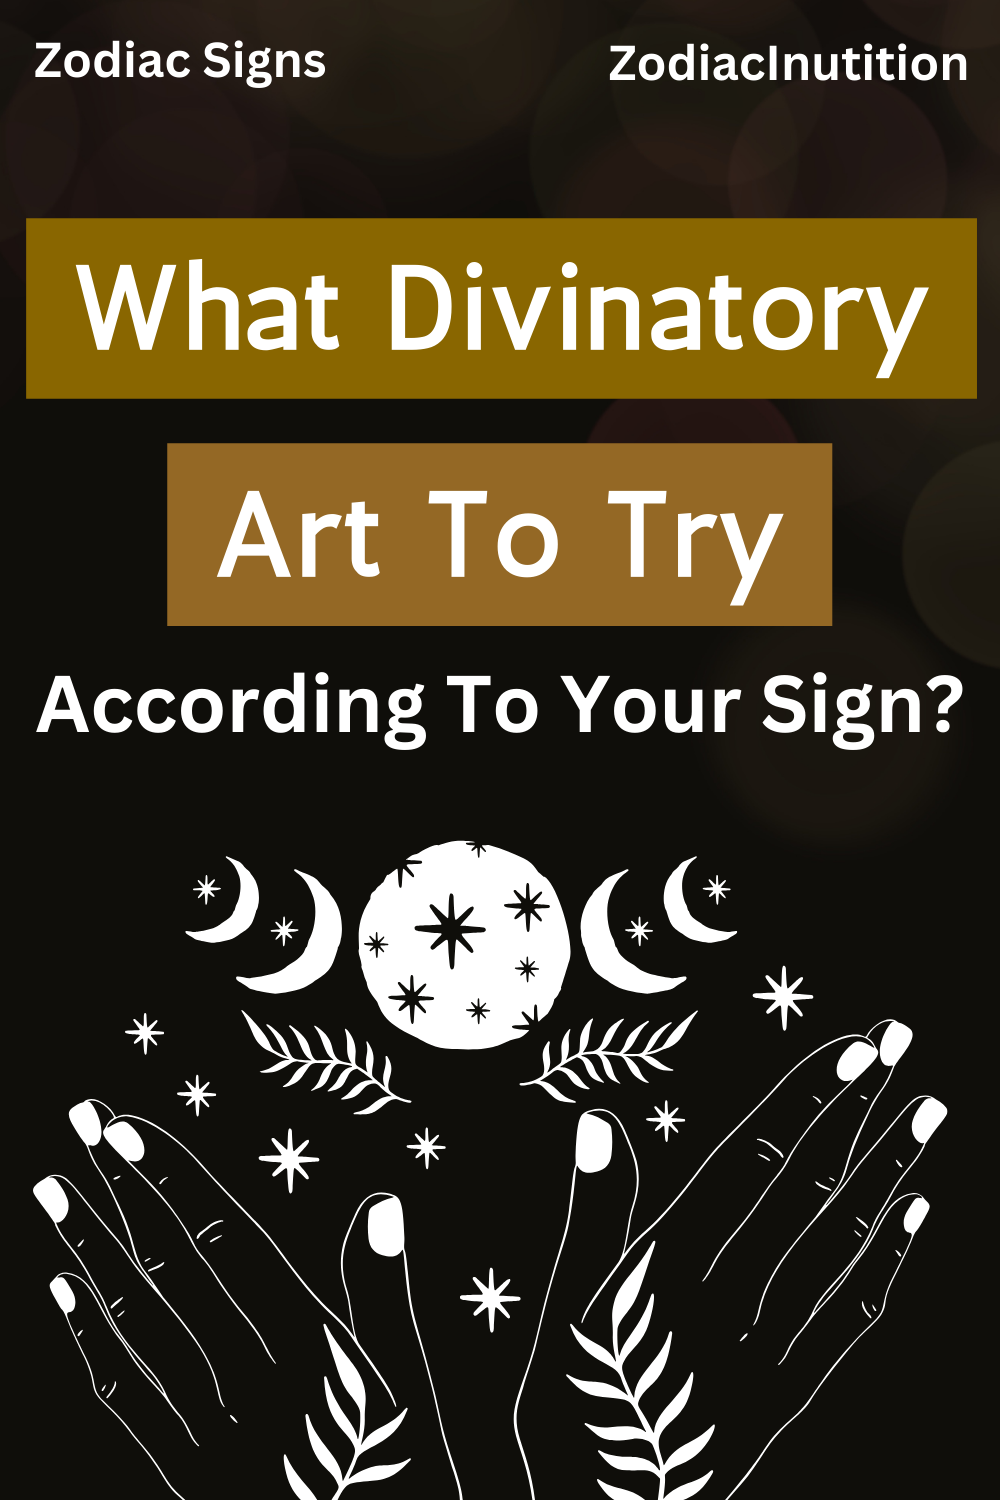 What Divinatory Art To Try According To Your Sign?